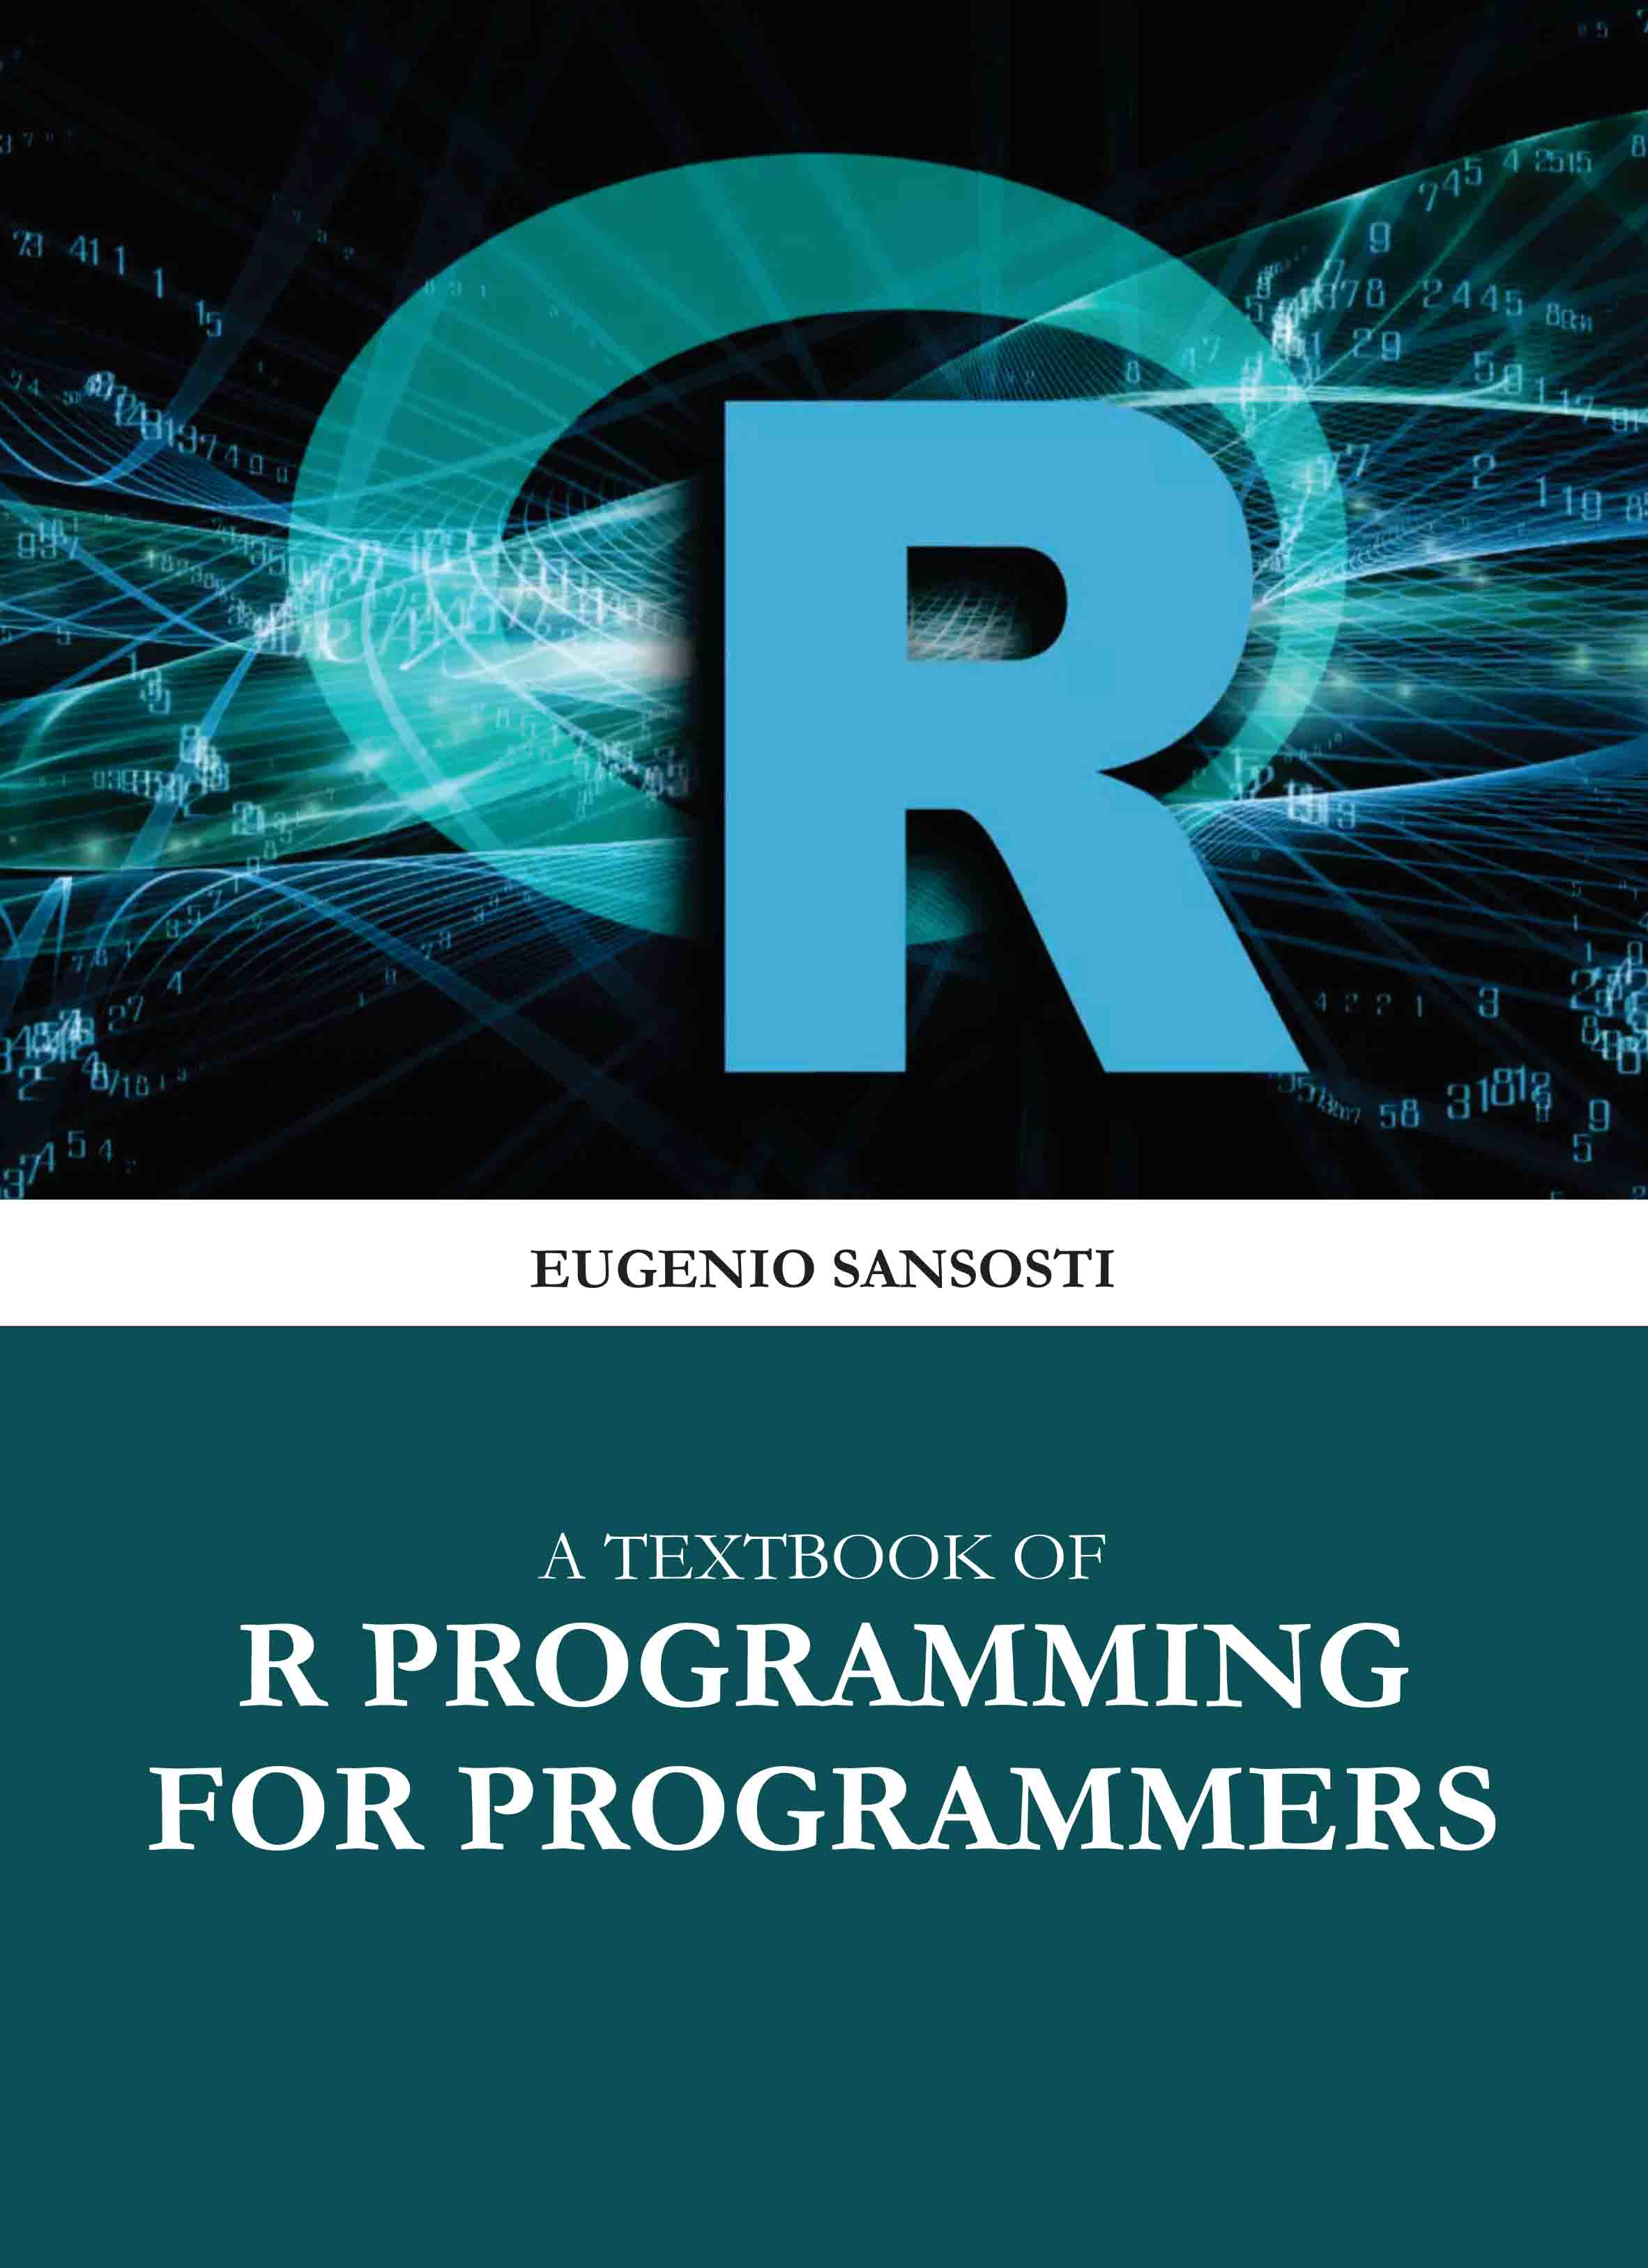 A Textbook of R Programming for Programmers